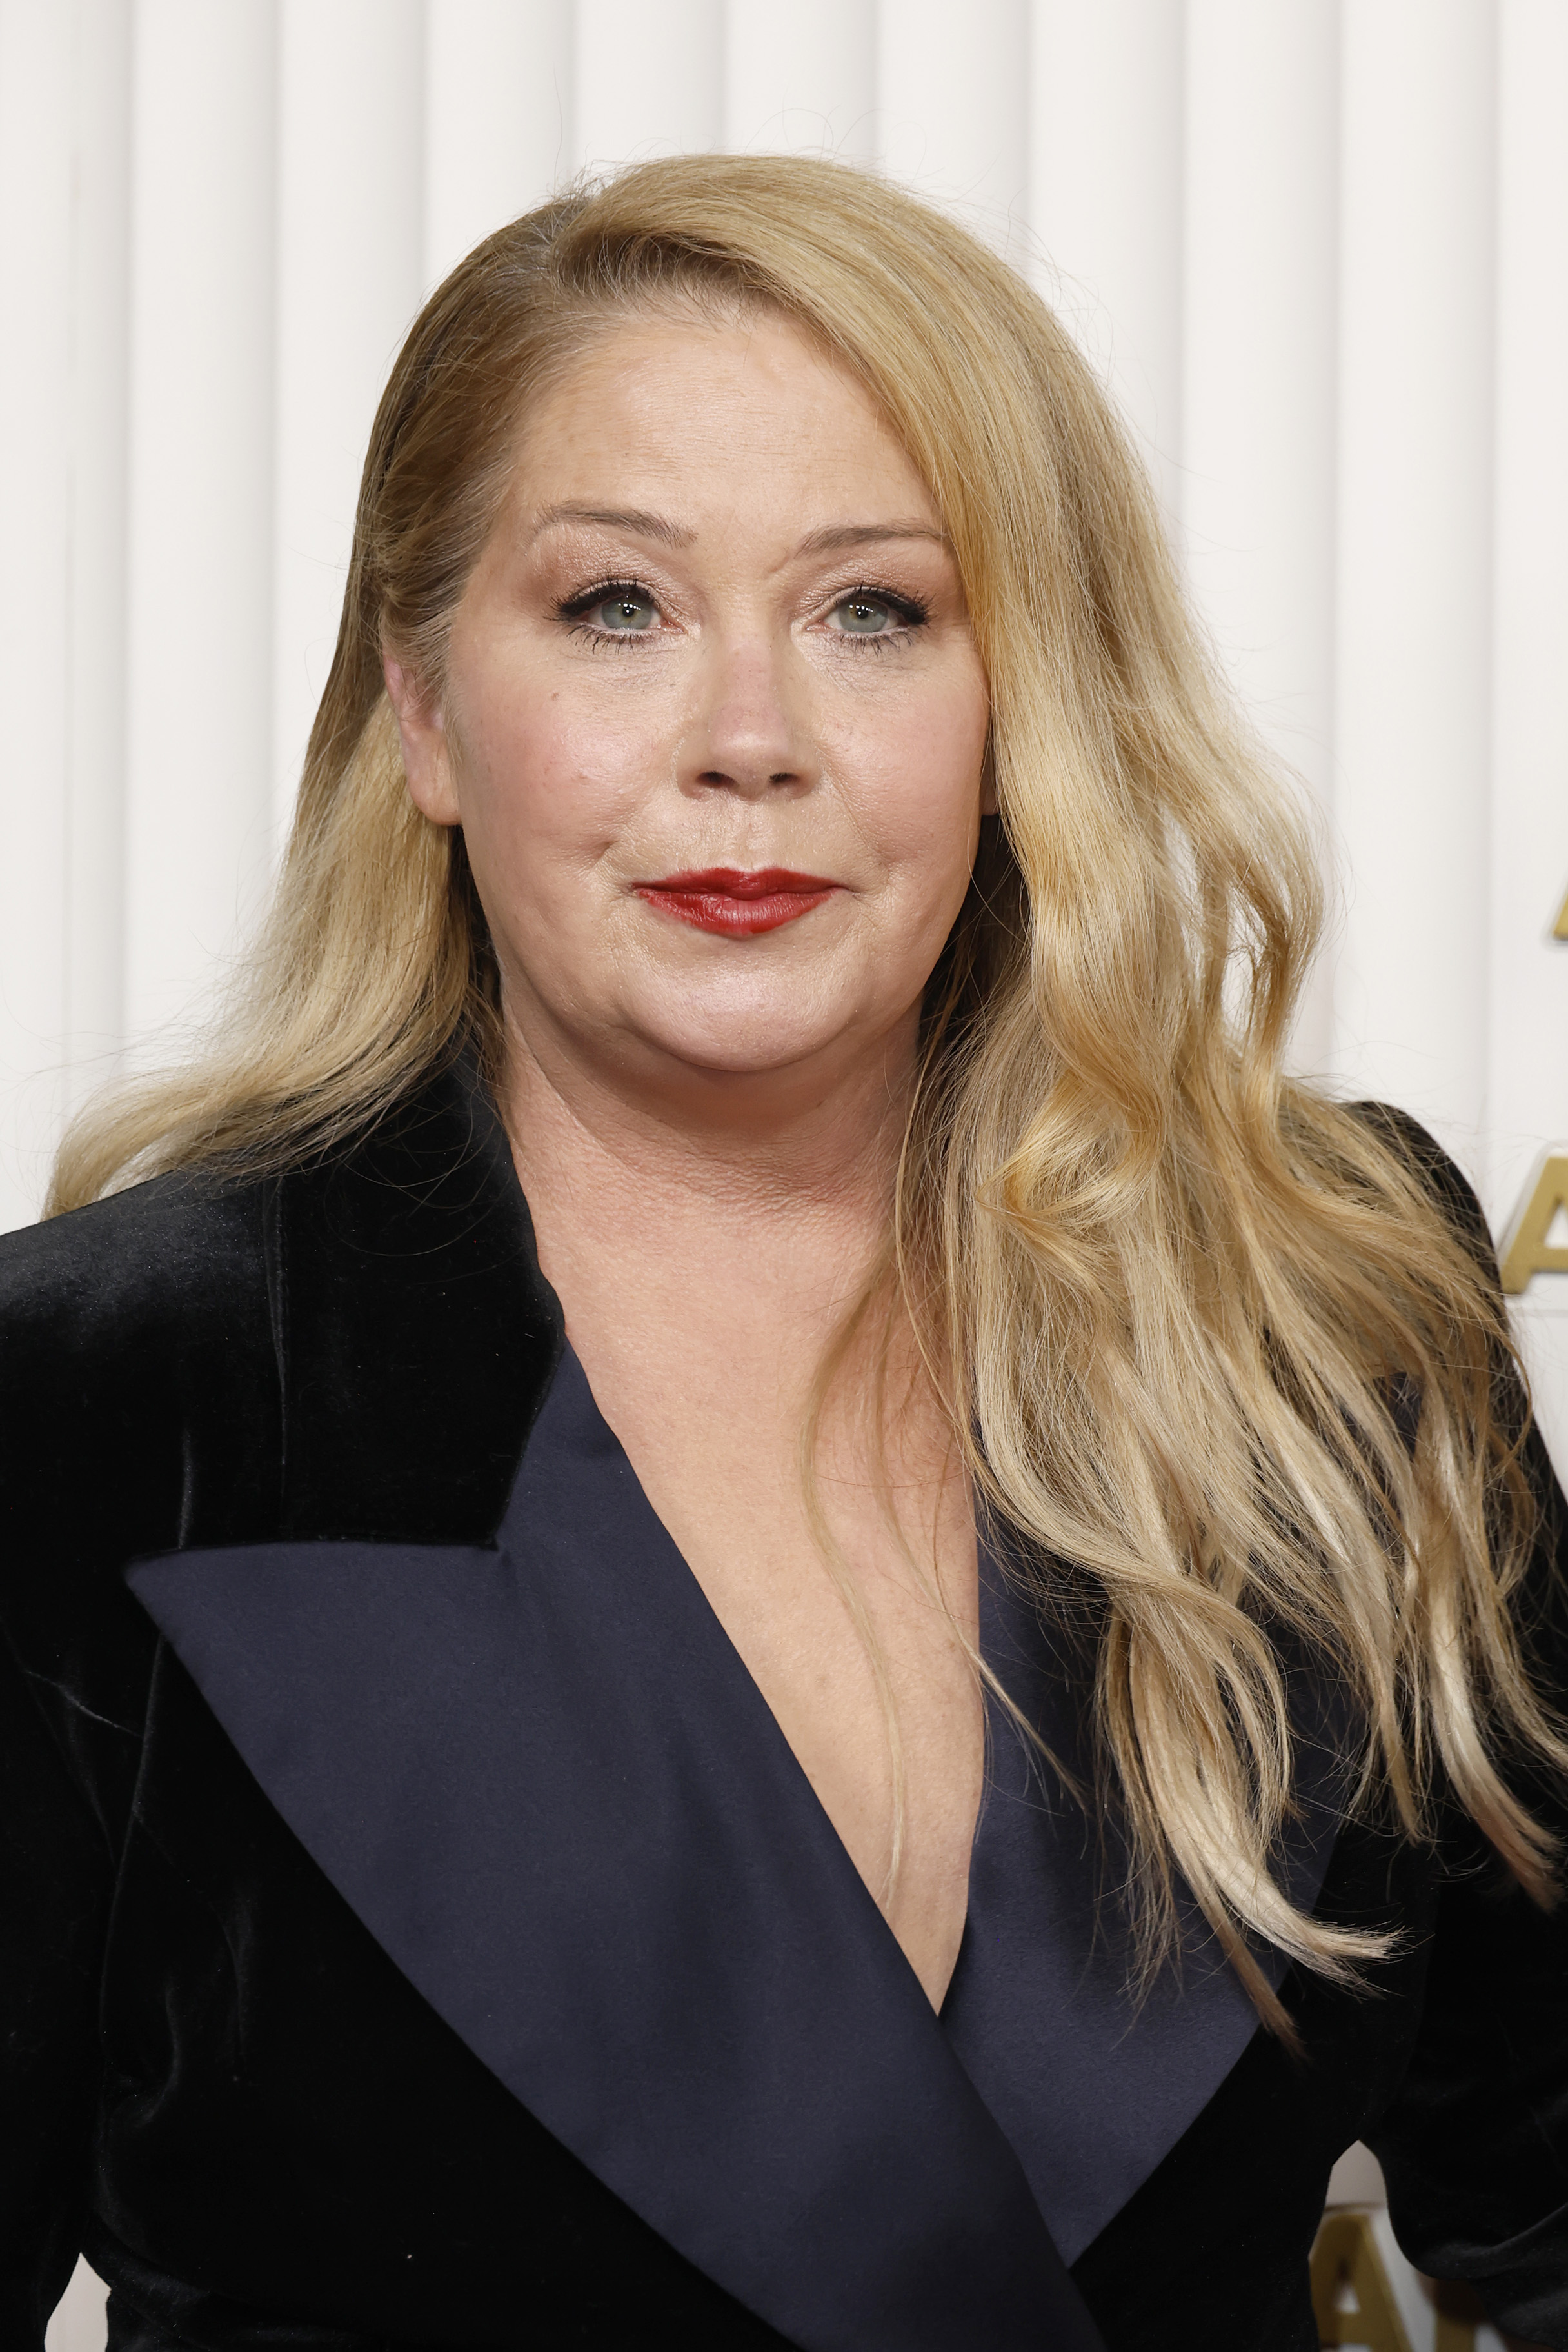 Christina Applegate at the 29th Annual Screen Actors Guild Awards in Los Angeles, California on February 26, 2023 | Source: Getty Images